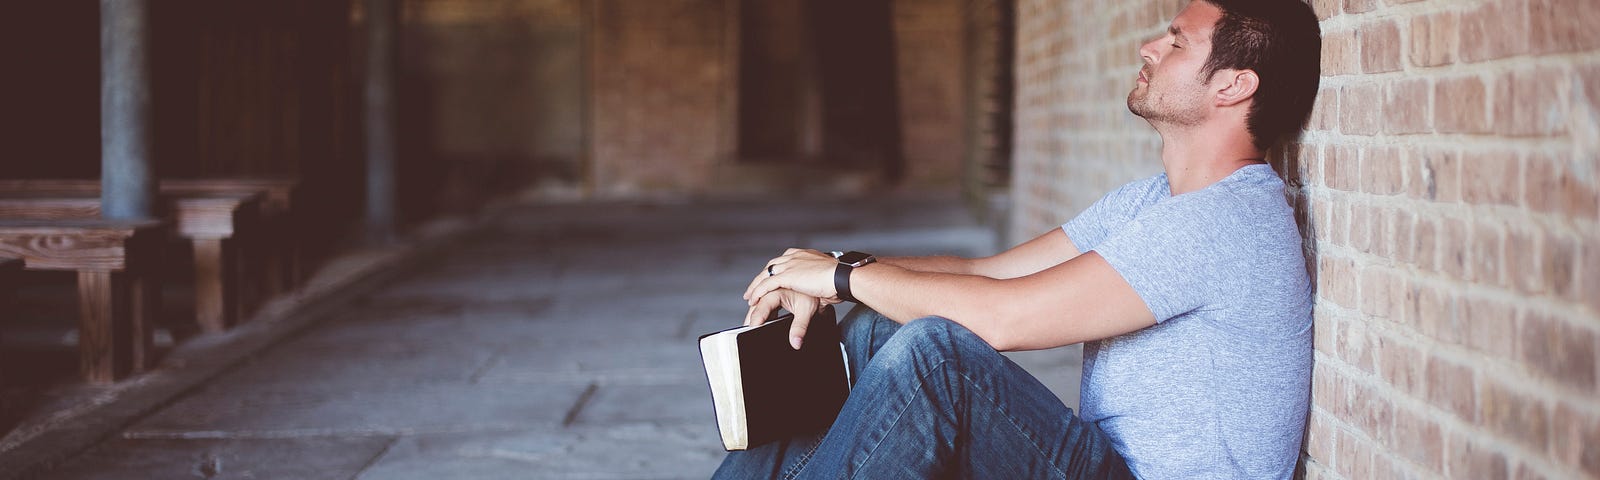 A guy sitting leaning against a wall with a book in his hand and his eyes closed as if sleeping.